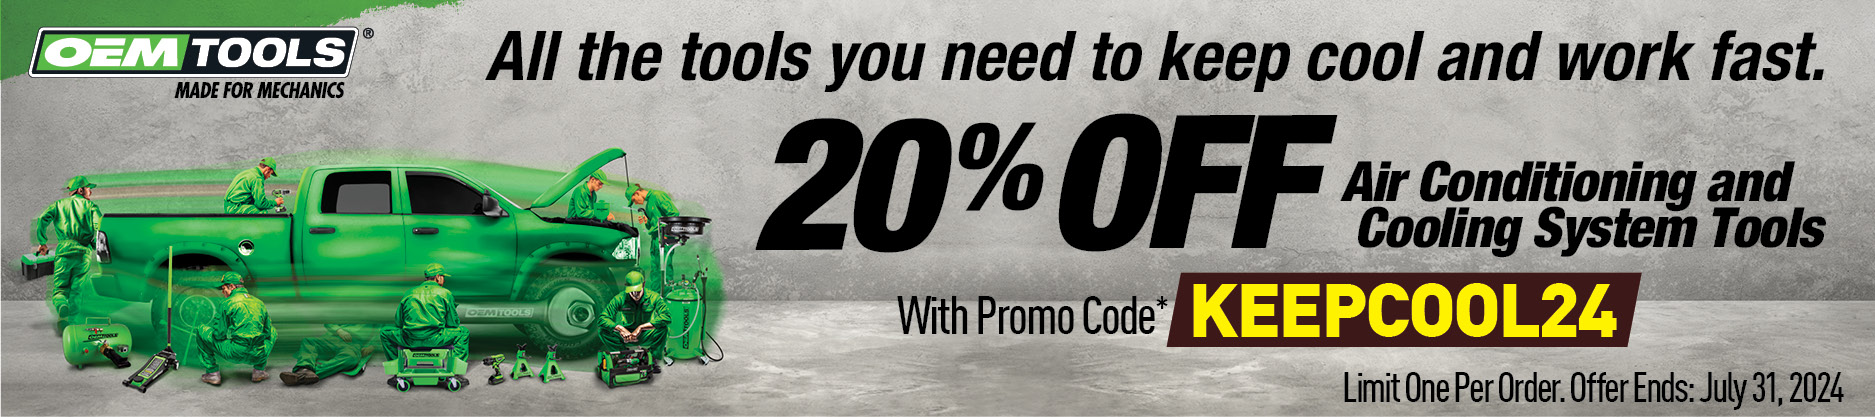 Get 20% Off OEMTOOLS Air Conditioning and Cooling System Tools with promo code KEEPCOOL24